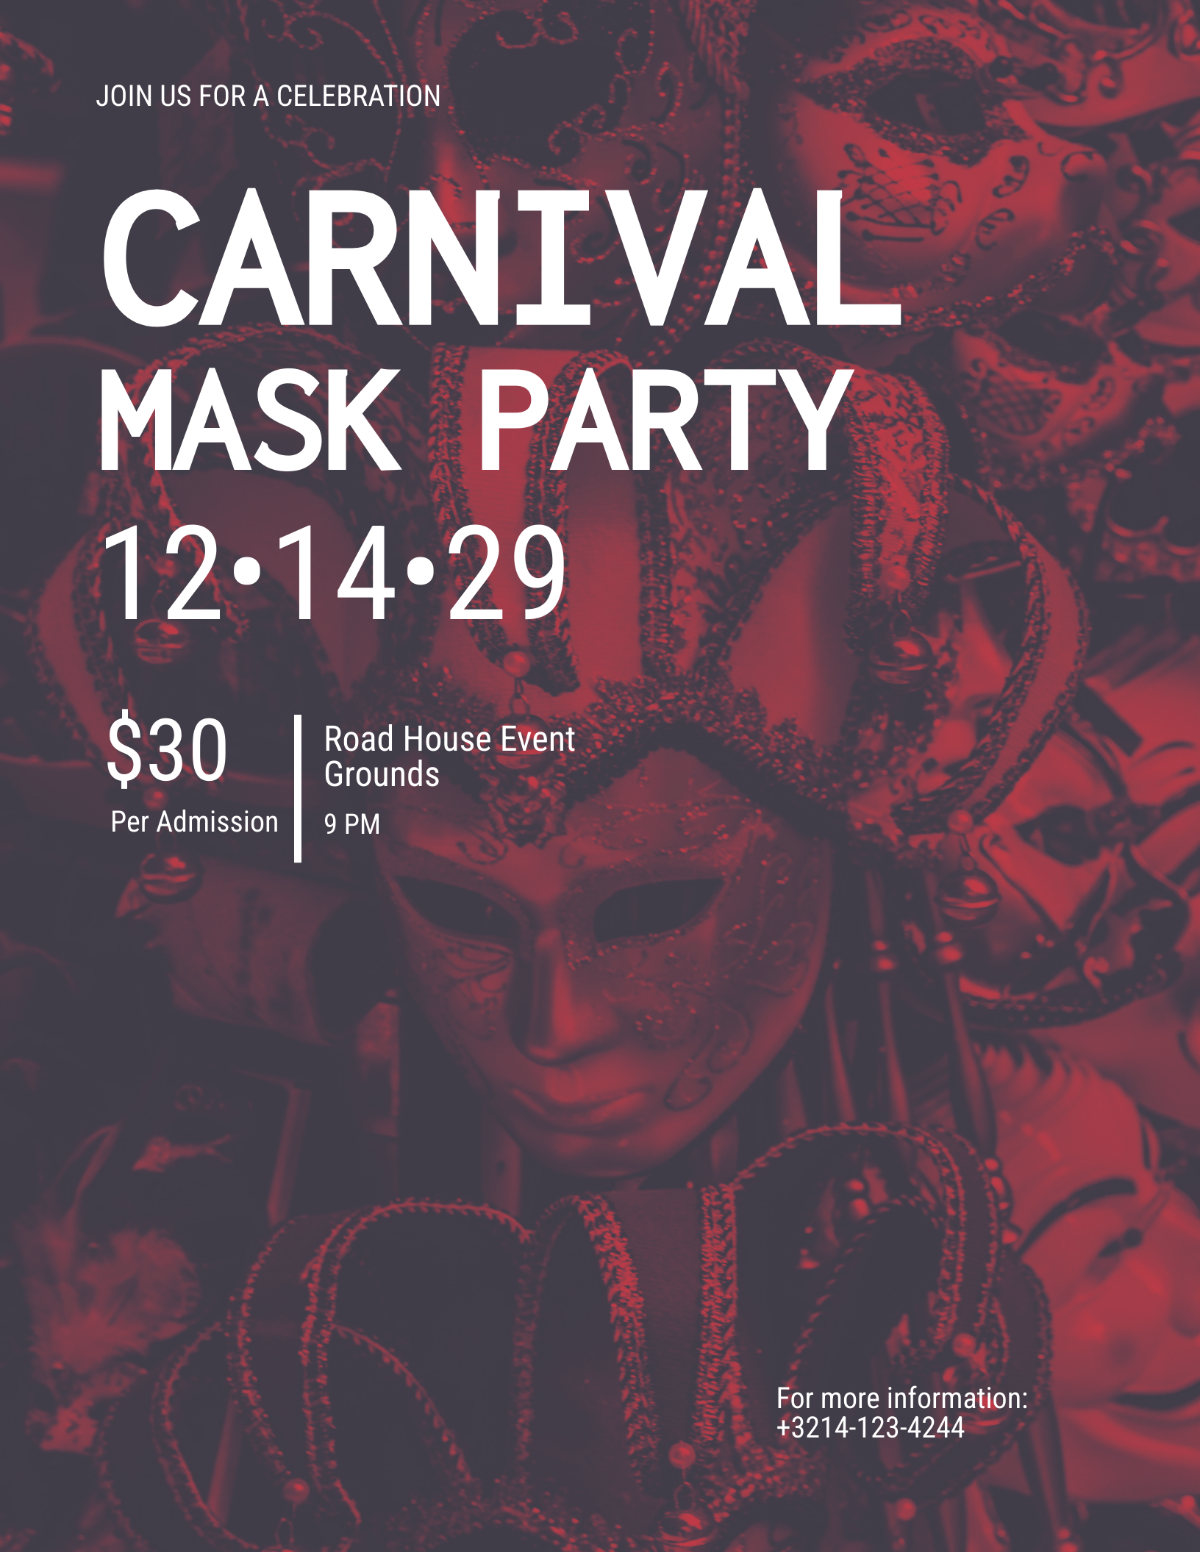 Carnival Mask Party Flyer Template